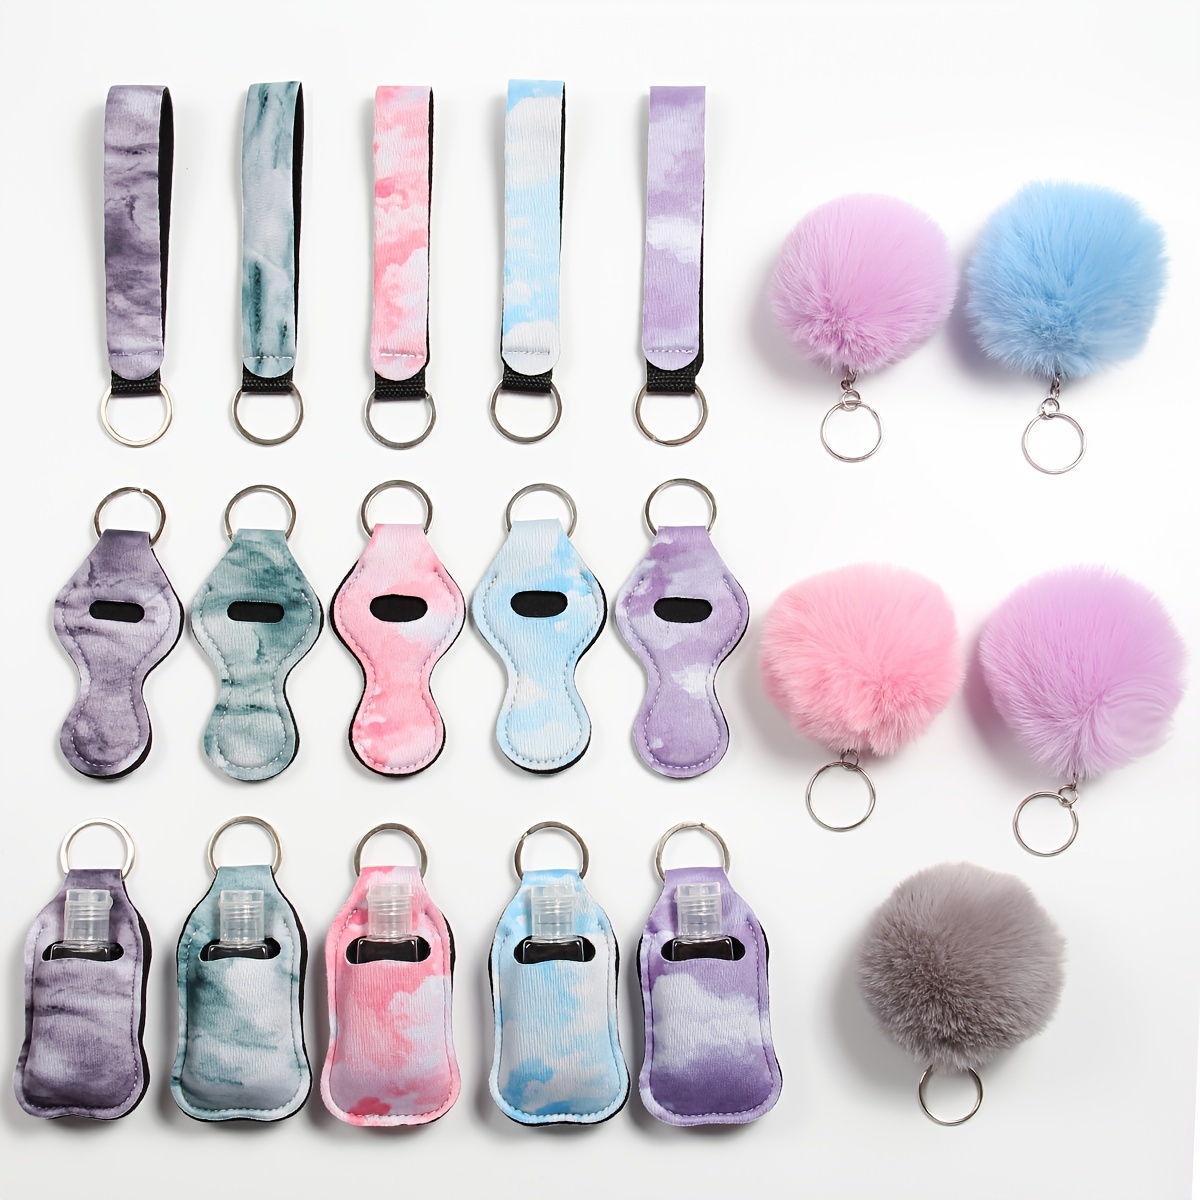 Wholesale Fashion Women Luxury Perfume Bottle Silicone Earphone Cases For  AirPods Pro 2 Transparent Cover With Pom Pom Fur Ball Keychain From  m.